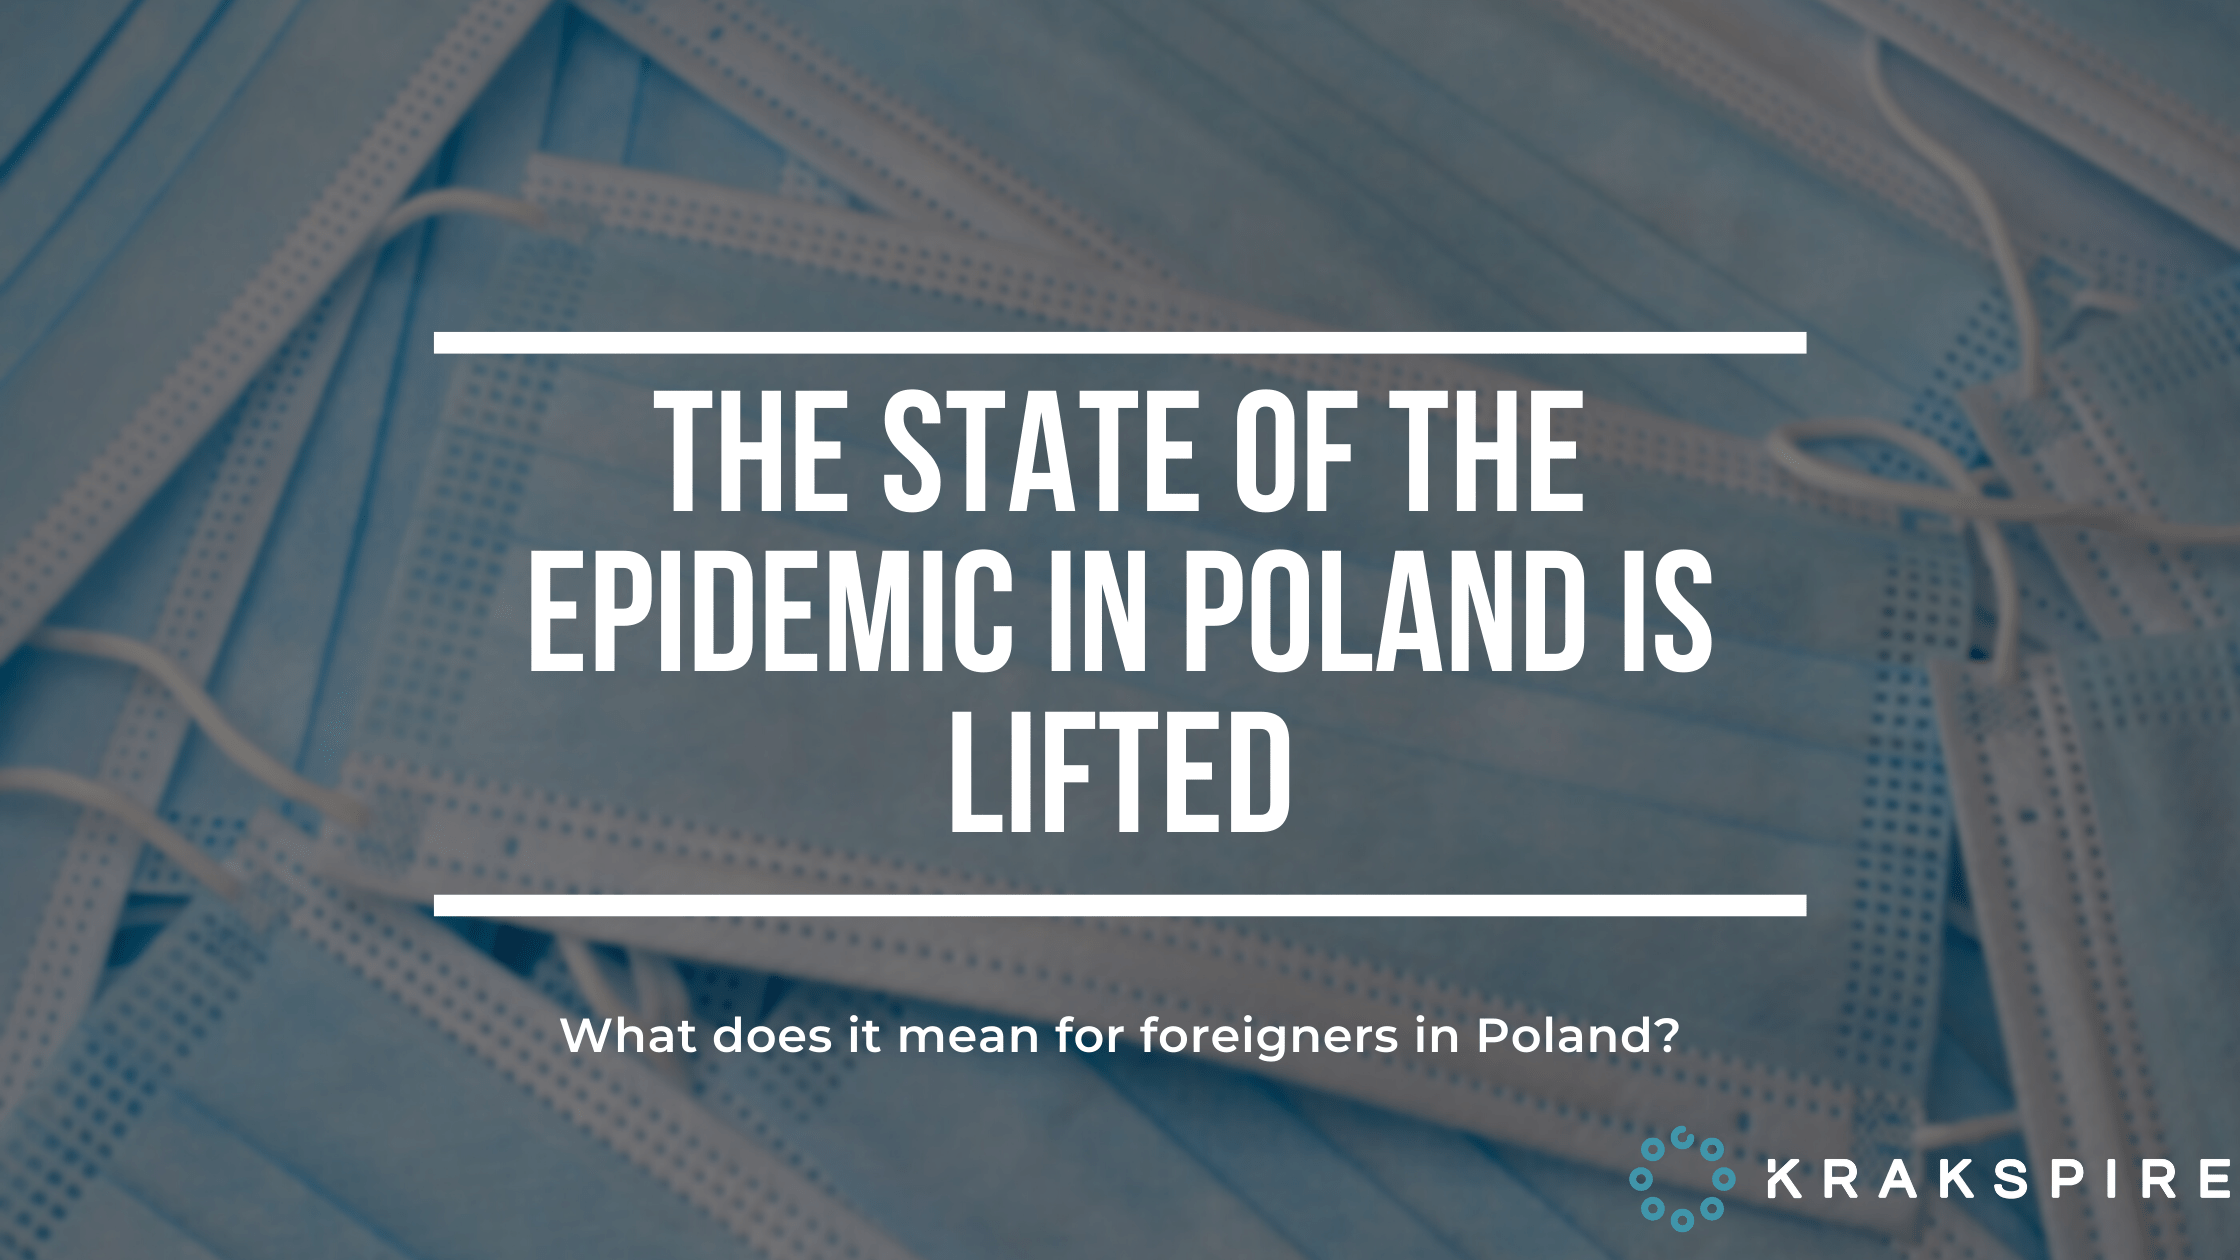 The state of the epidemic in Poland is lifted